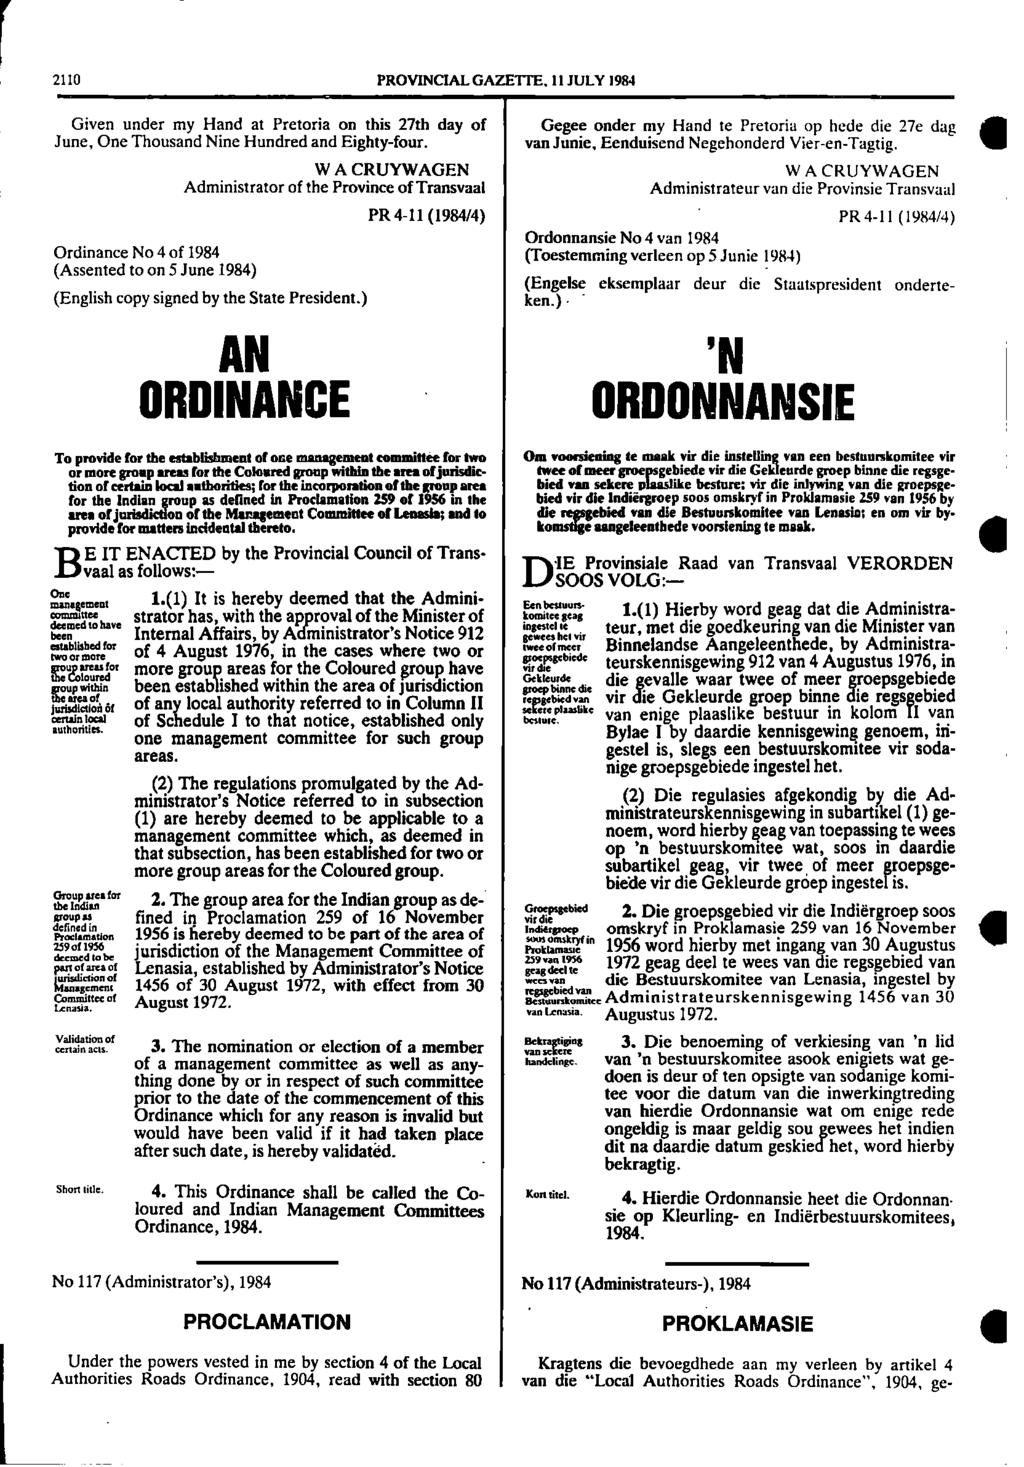 2110 PROVINCIAL GAZETTE II JULY 19M Given under my Hand at Pretoria on this 27th day of Gegee onder my Hand te Pretoria op hede die 27e dag June One Thousand Nine Hundred and Eightyfour van Junie